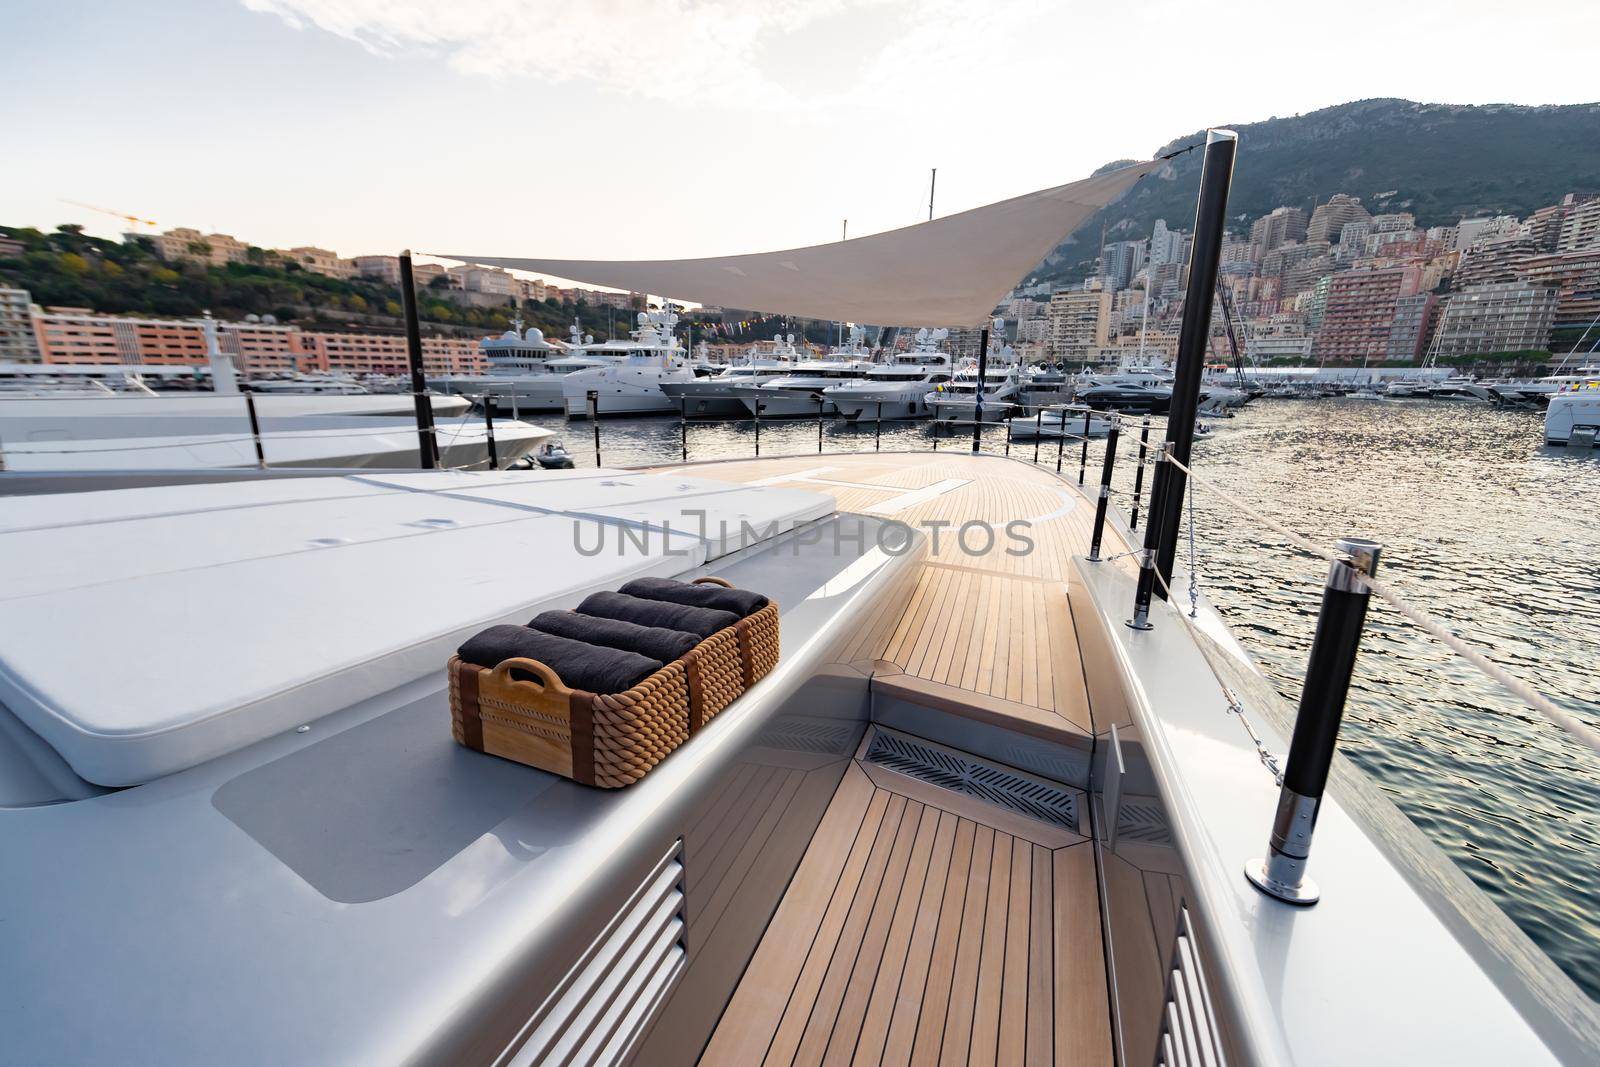 The front deck of huge yacht in port of Monaco at sunset, the place for landing of helicopter, a lot of motorboats are on background, the chrome plated handrail, megayacht is moored in marina, dusk. High quality photo